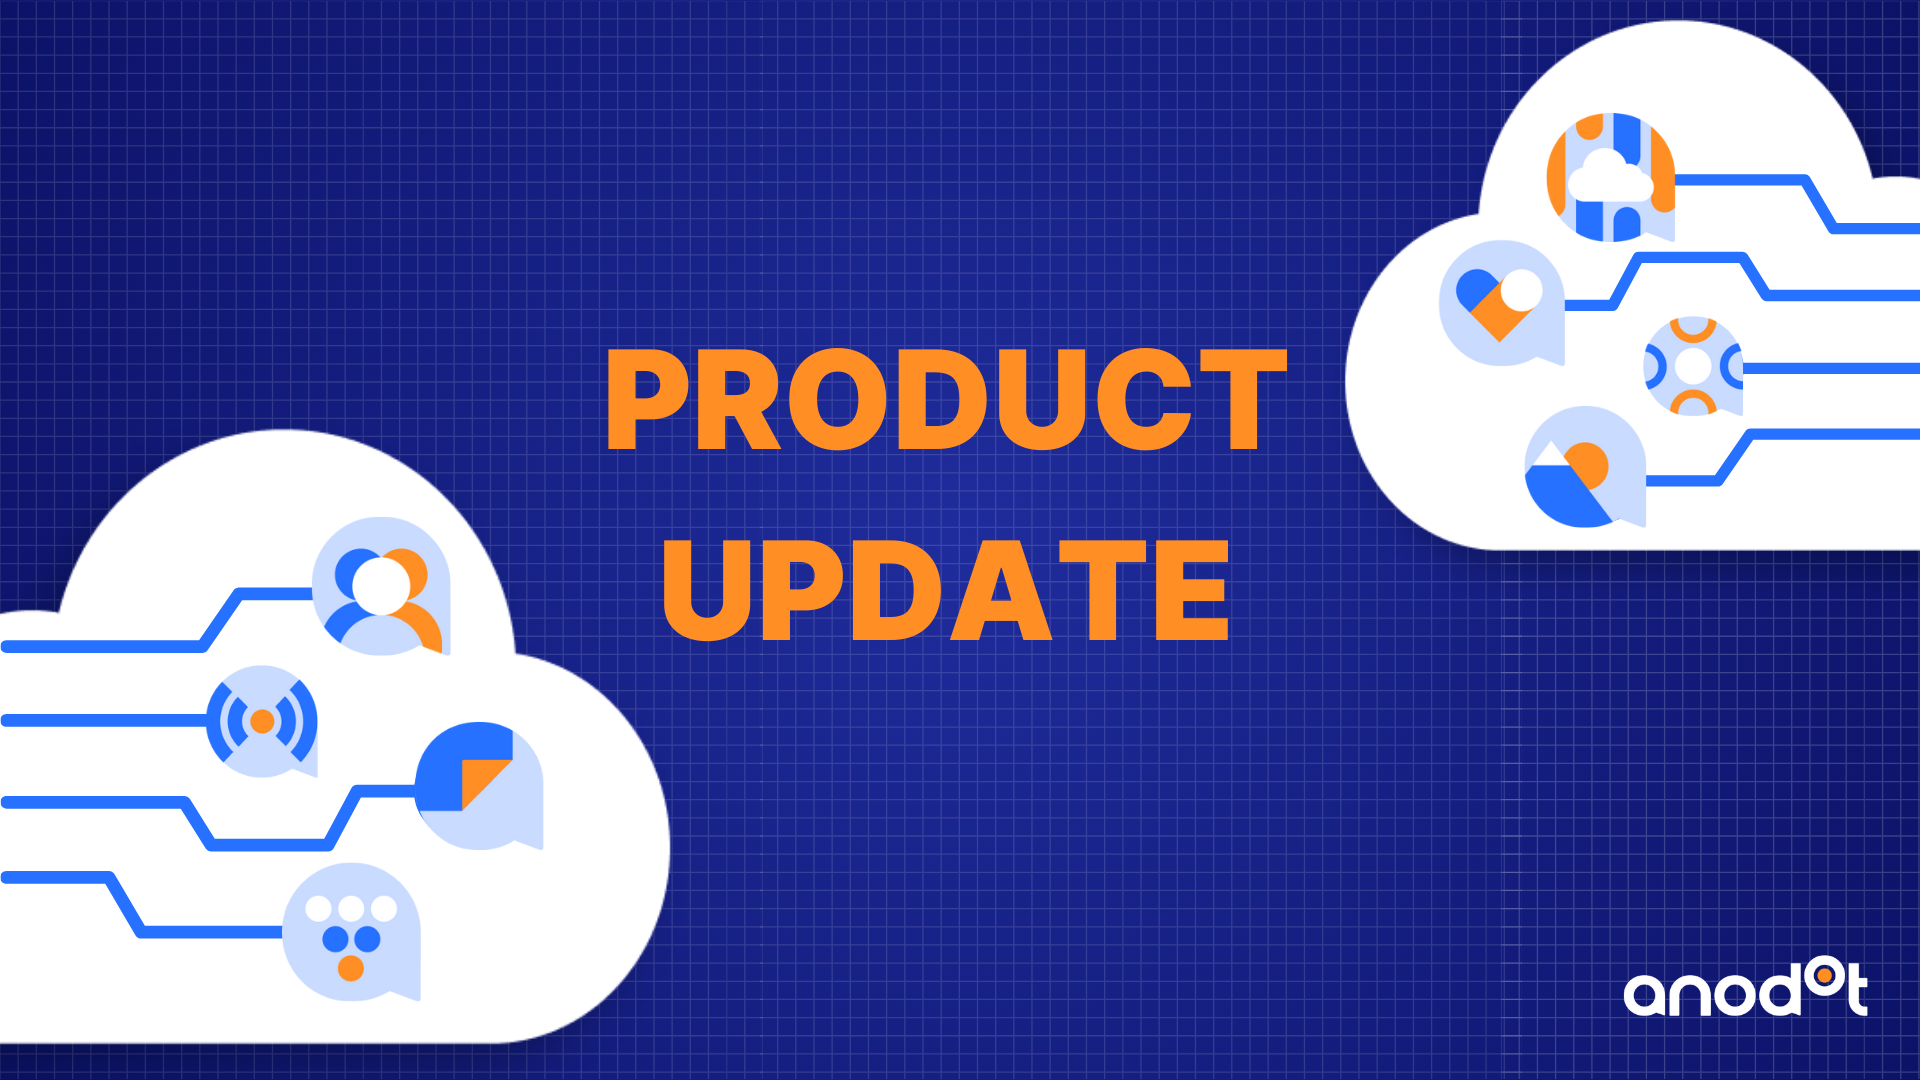 Product Update Banner